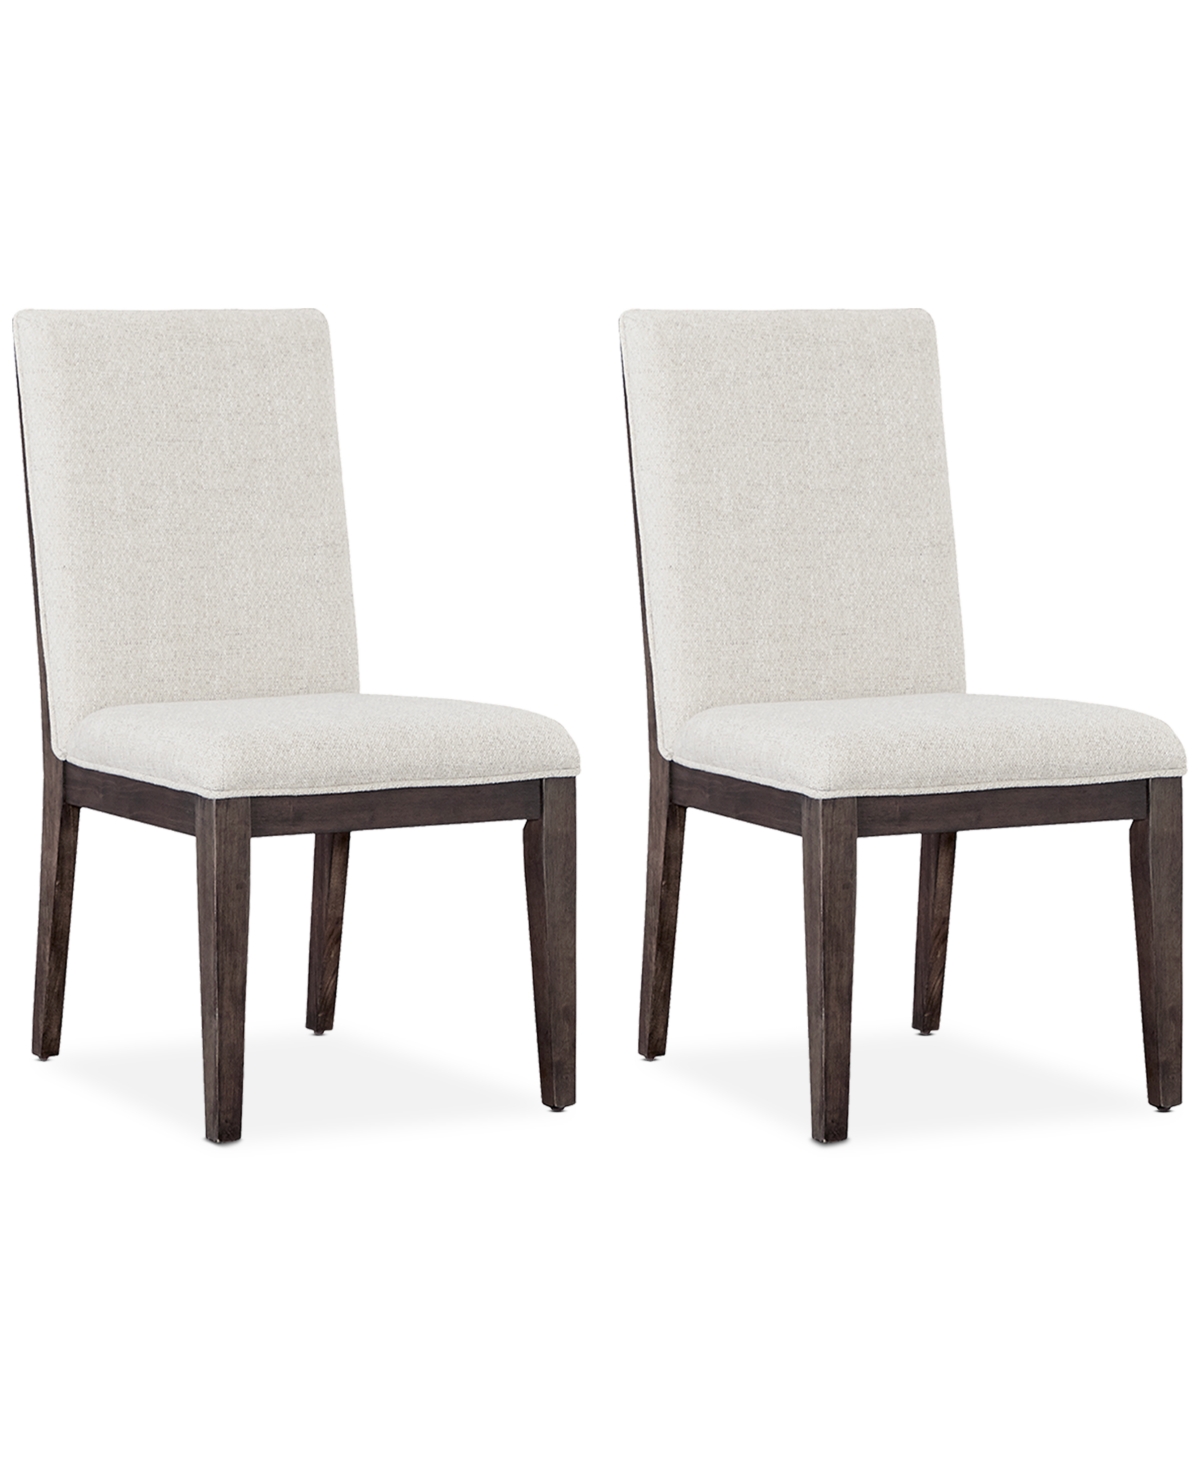 Aspenhome Beckett Upholstered Dining Side Chair 2pc Set